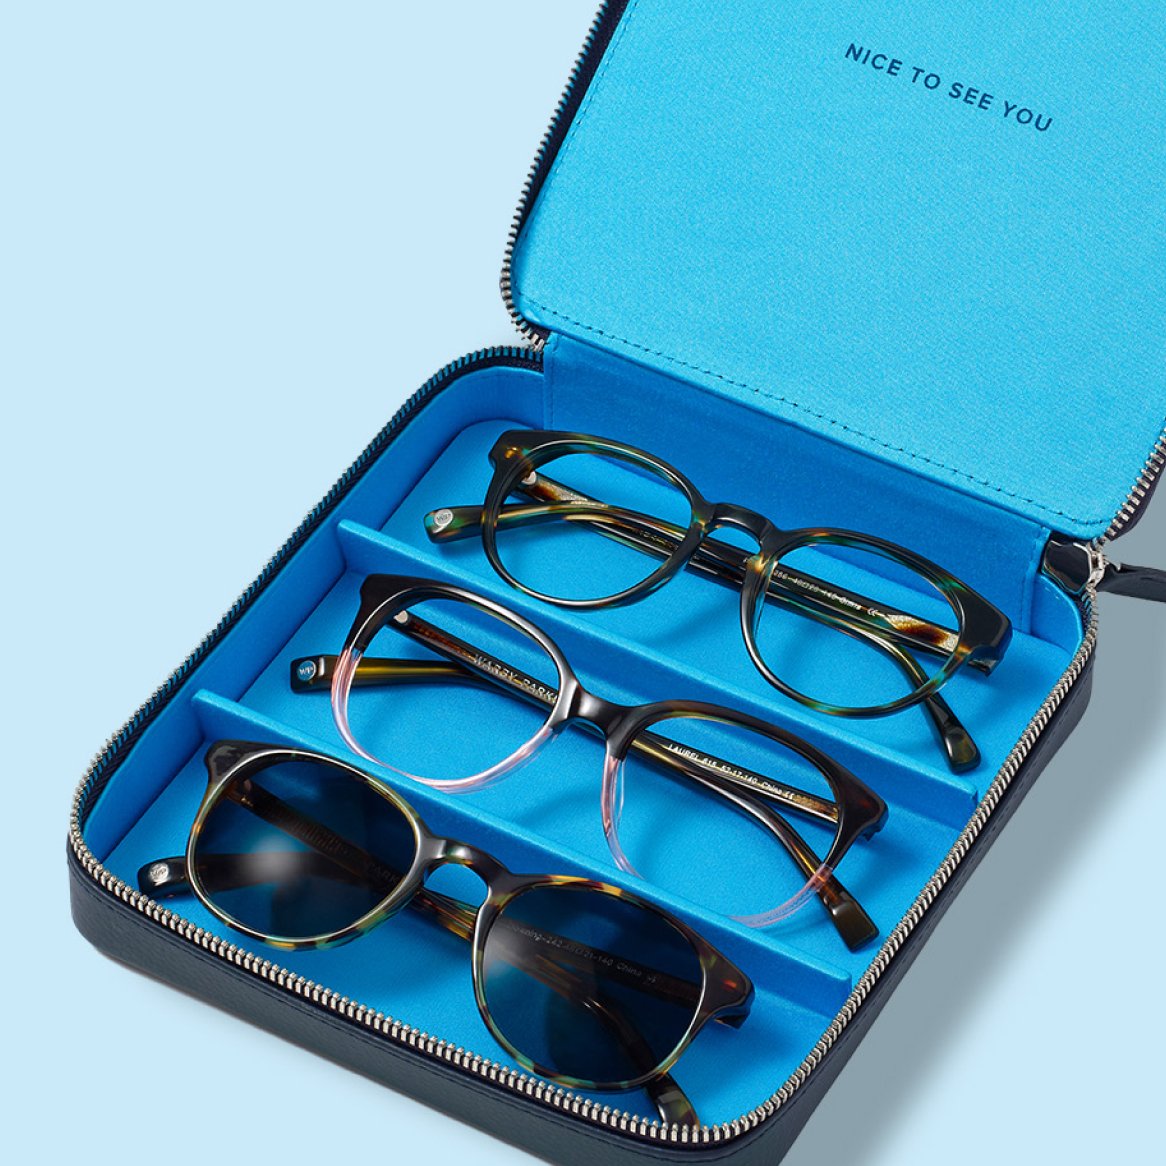 A travel case for sunglasses with room for three pairs of glasses.